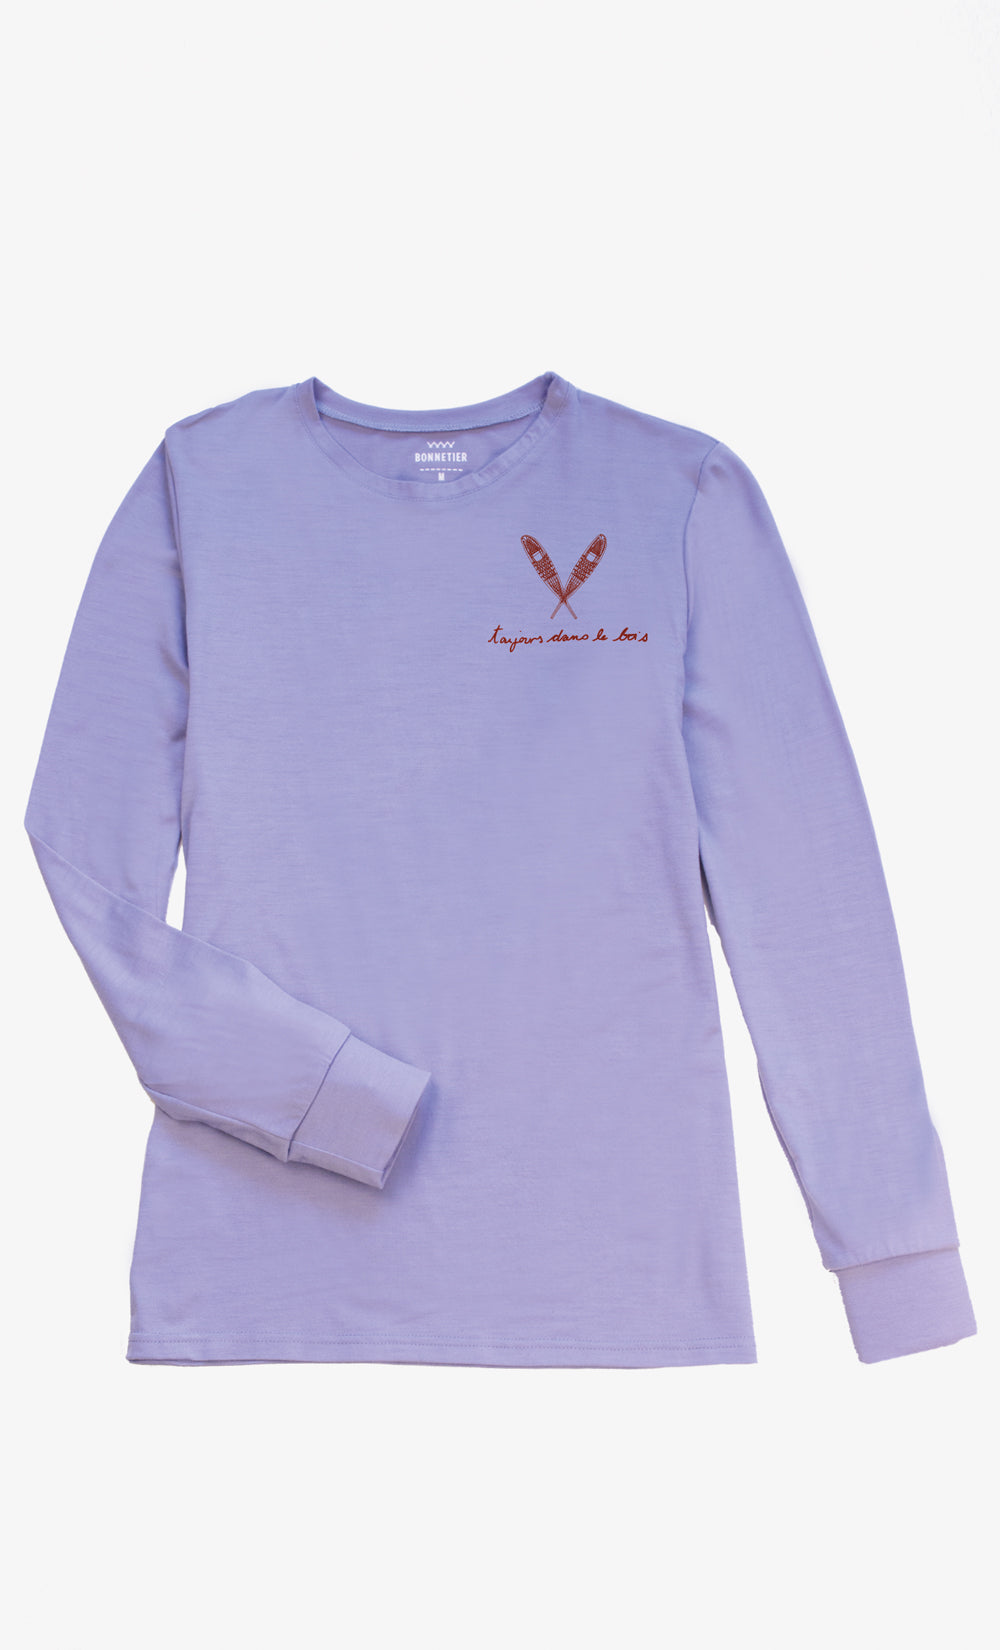 Women's Long Sleeve Top - Ice Blue - RAQUETTES